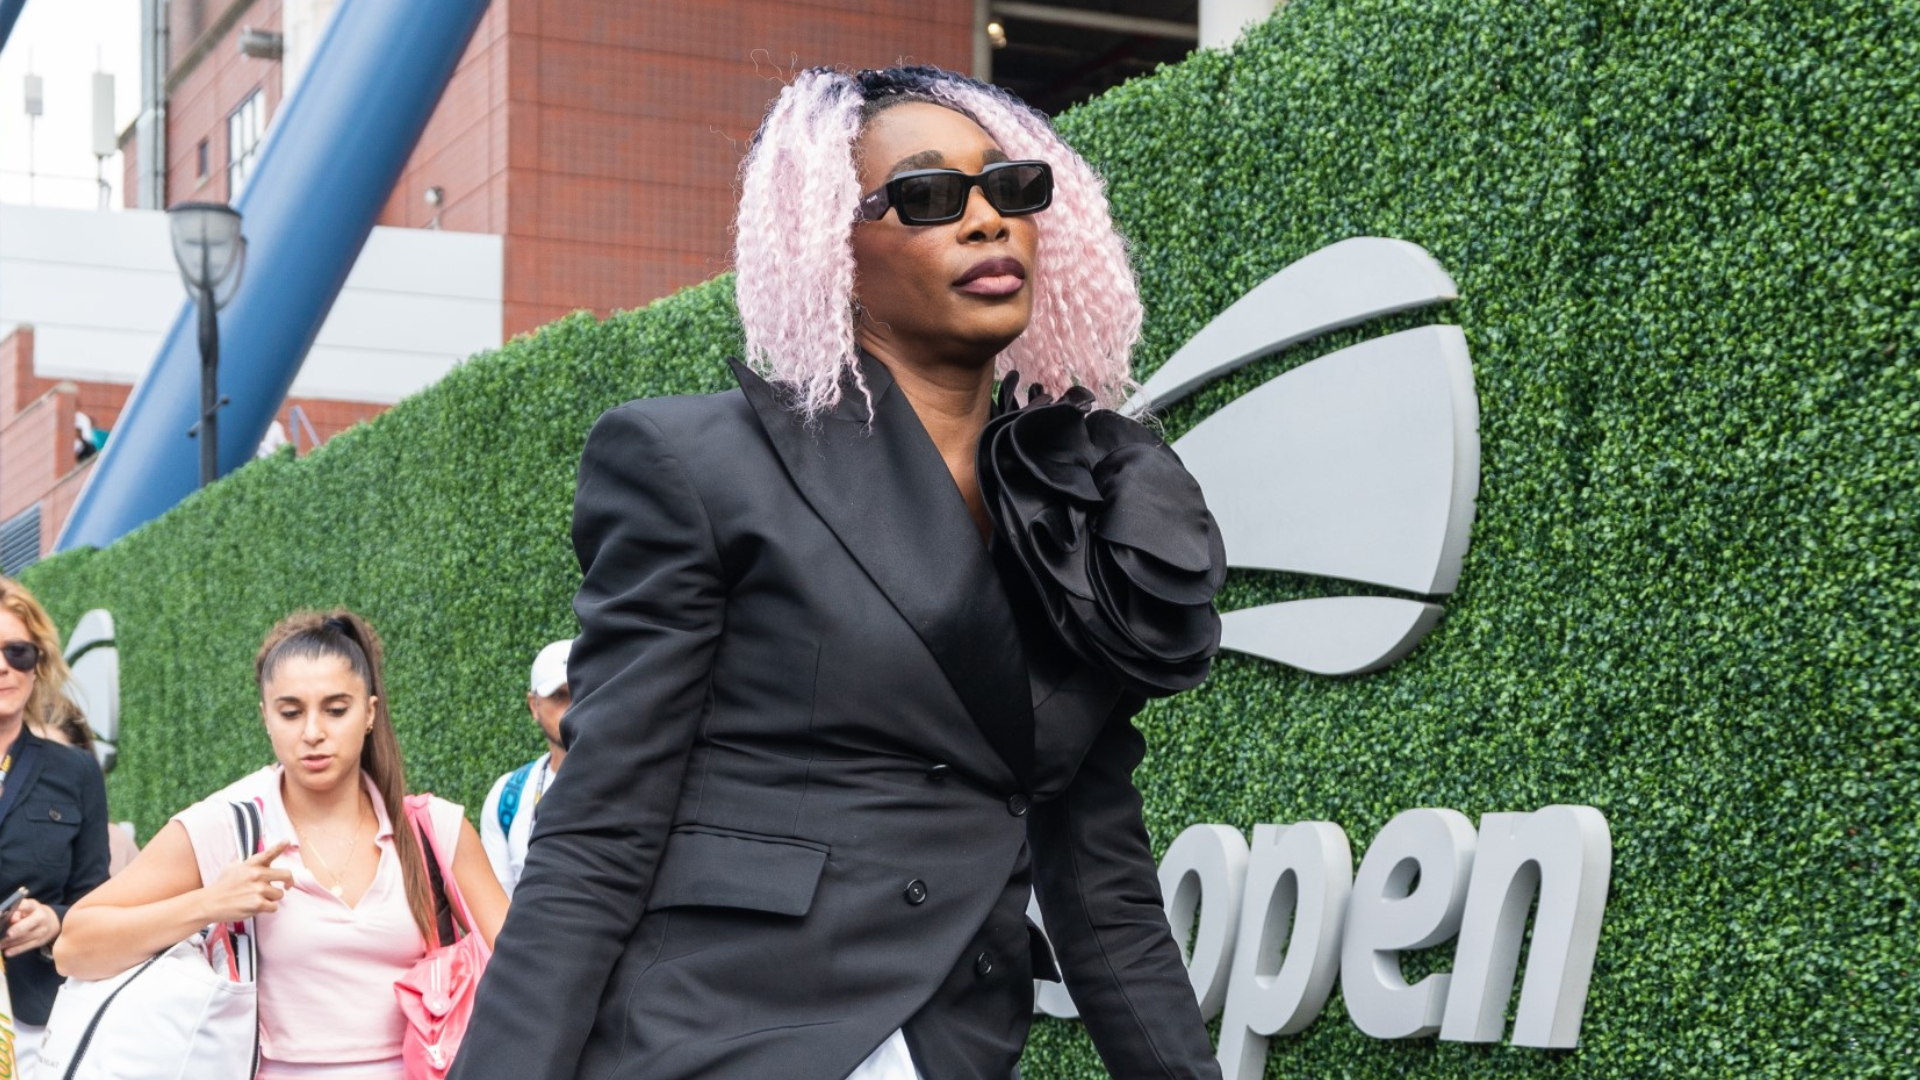 Venus Williams Takes High Fashion For A Spin At The U.S. Open